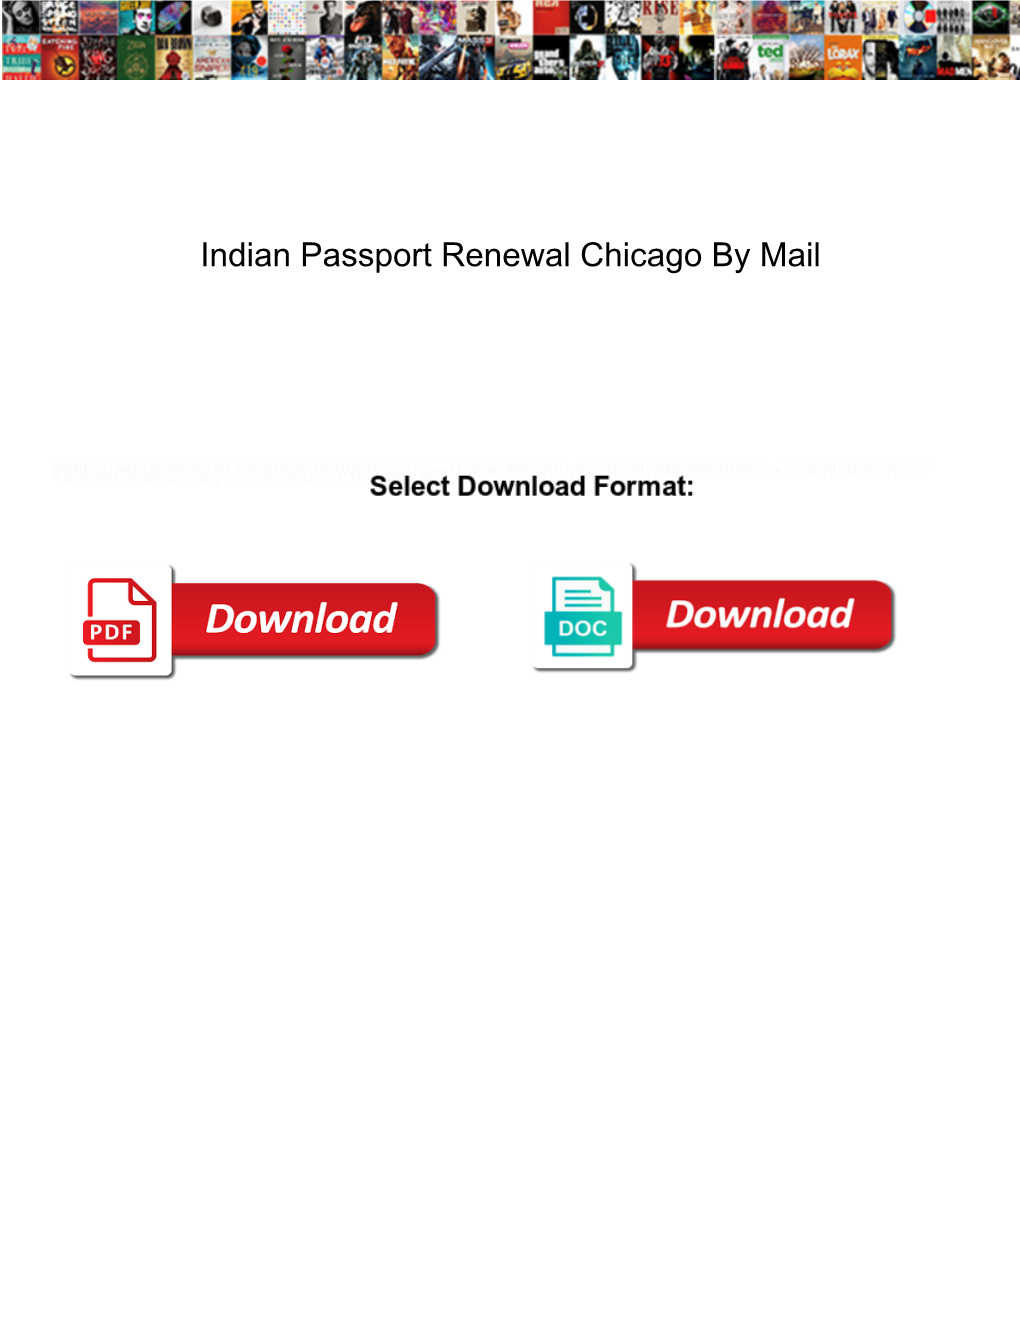 Indian Passport Renewal Chicago by Mail